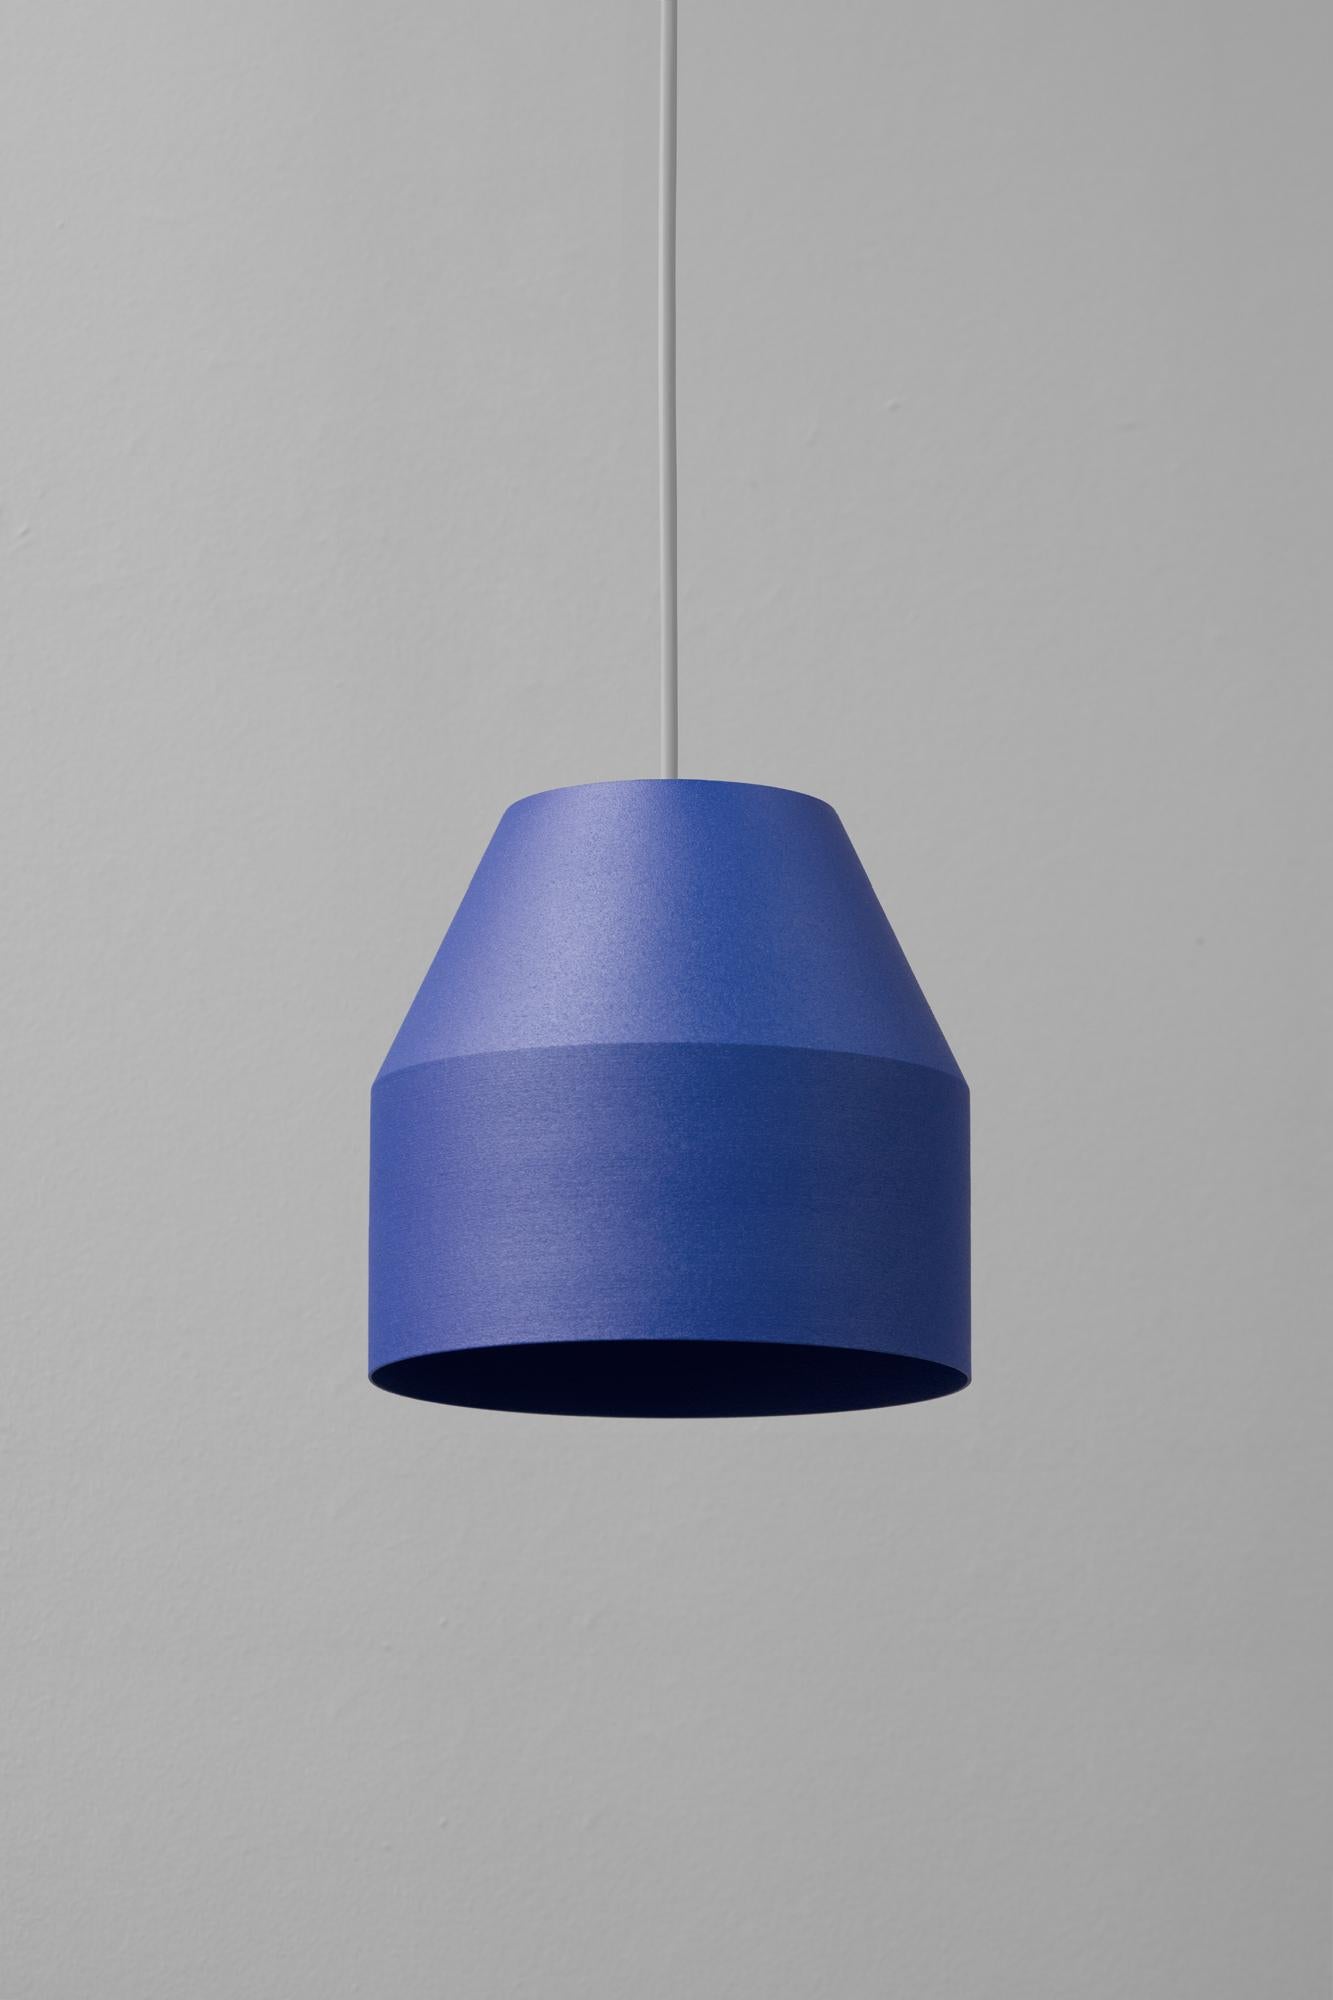 Big Ultra Blue Cap Pendant Lamp by +kouple
Dimensions: Ø 16 x H 16,5 cm. 
Materials: Powder-coated steel.

Available in different color options. Available in two different sizes. The rod length is 200 cm. Please contact us.

All our lamps can be